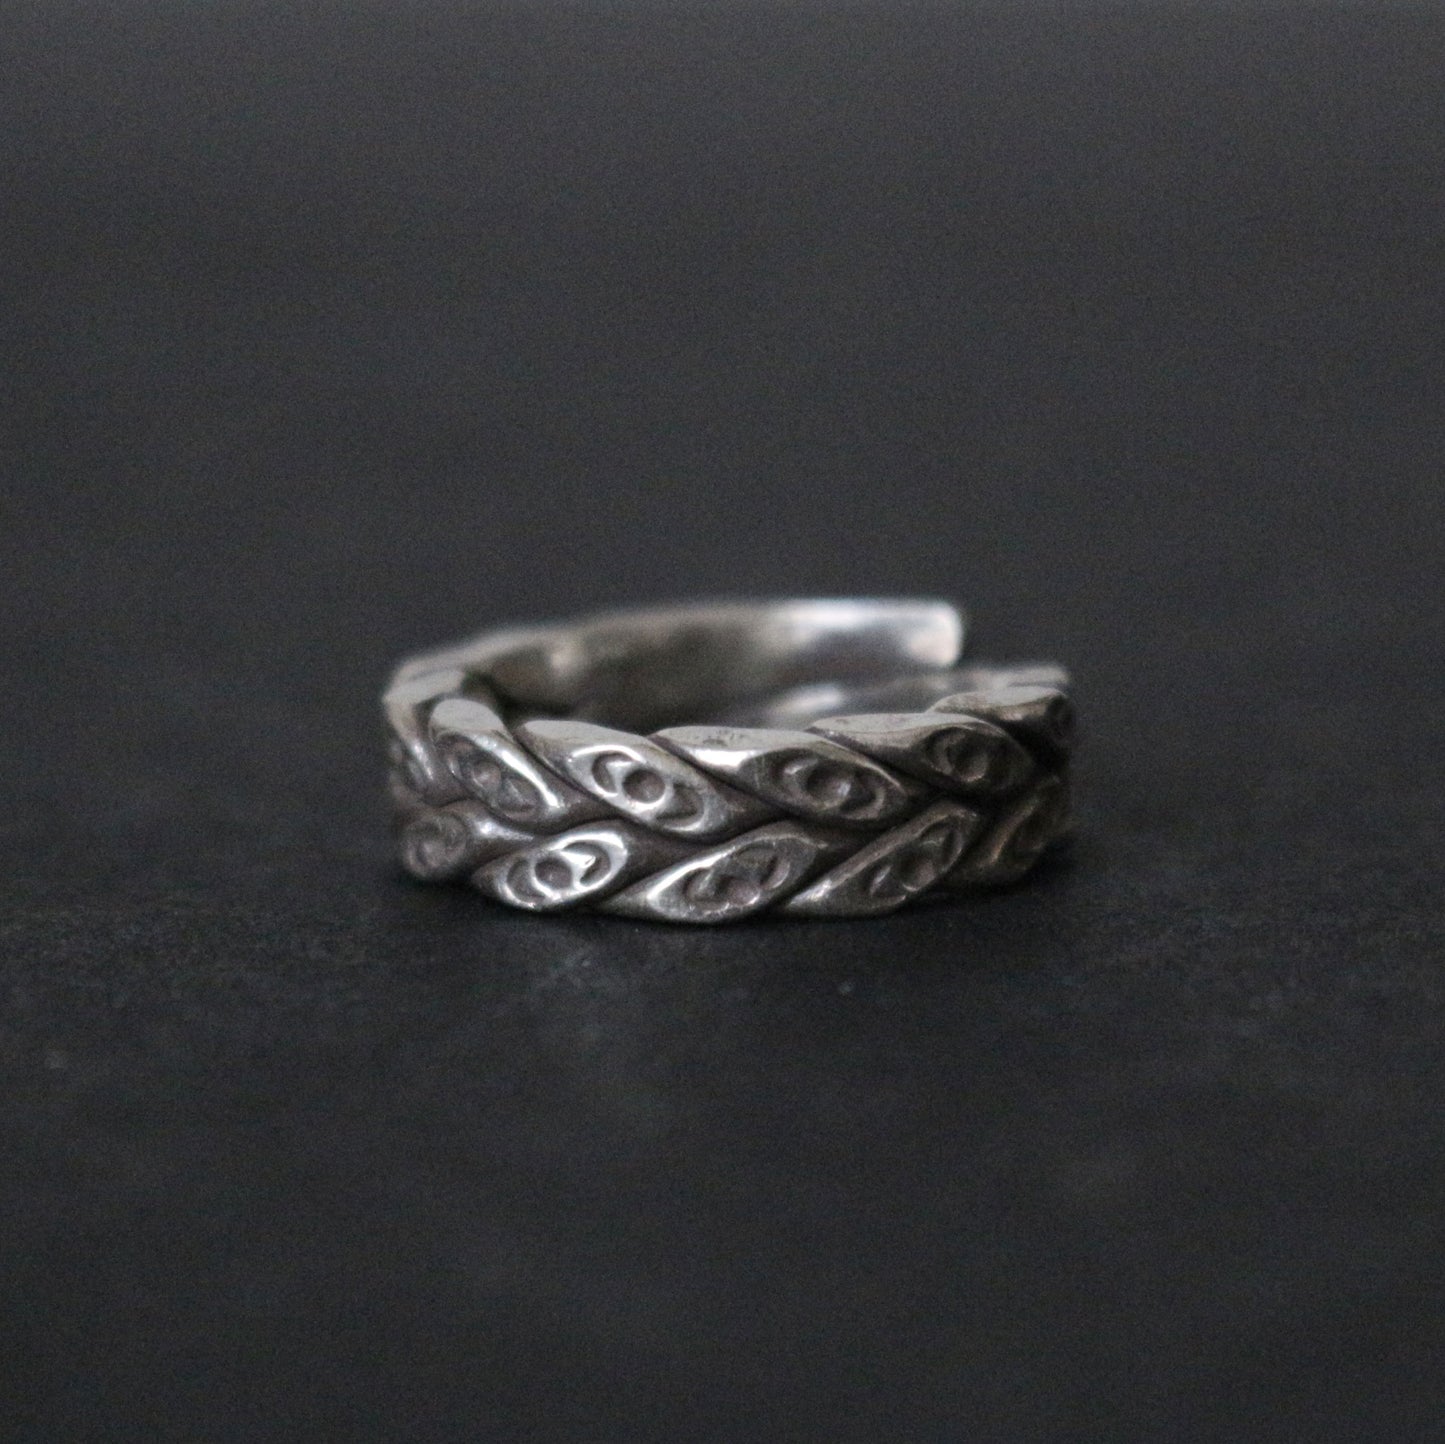 Hammered Silver Ring